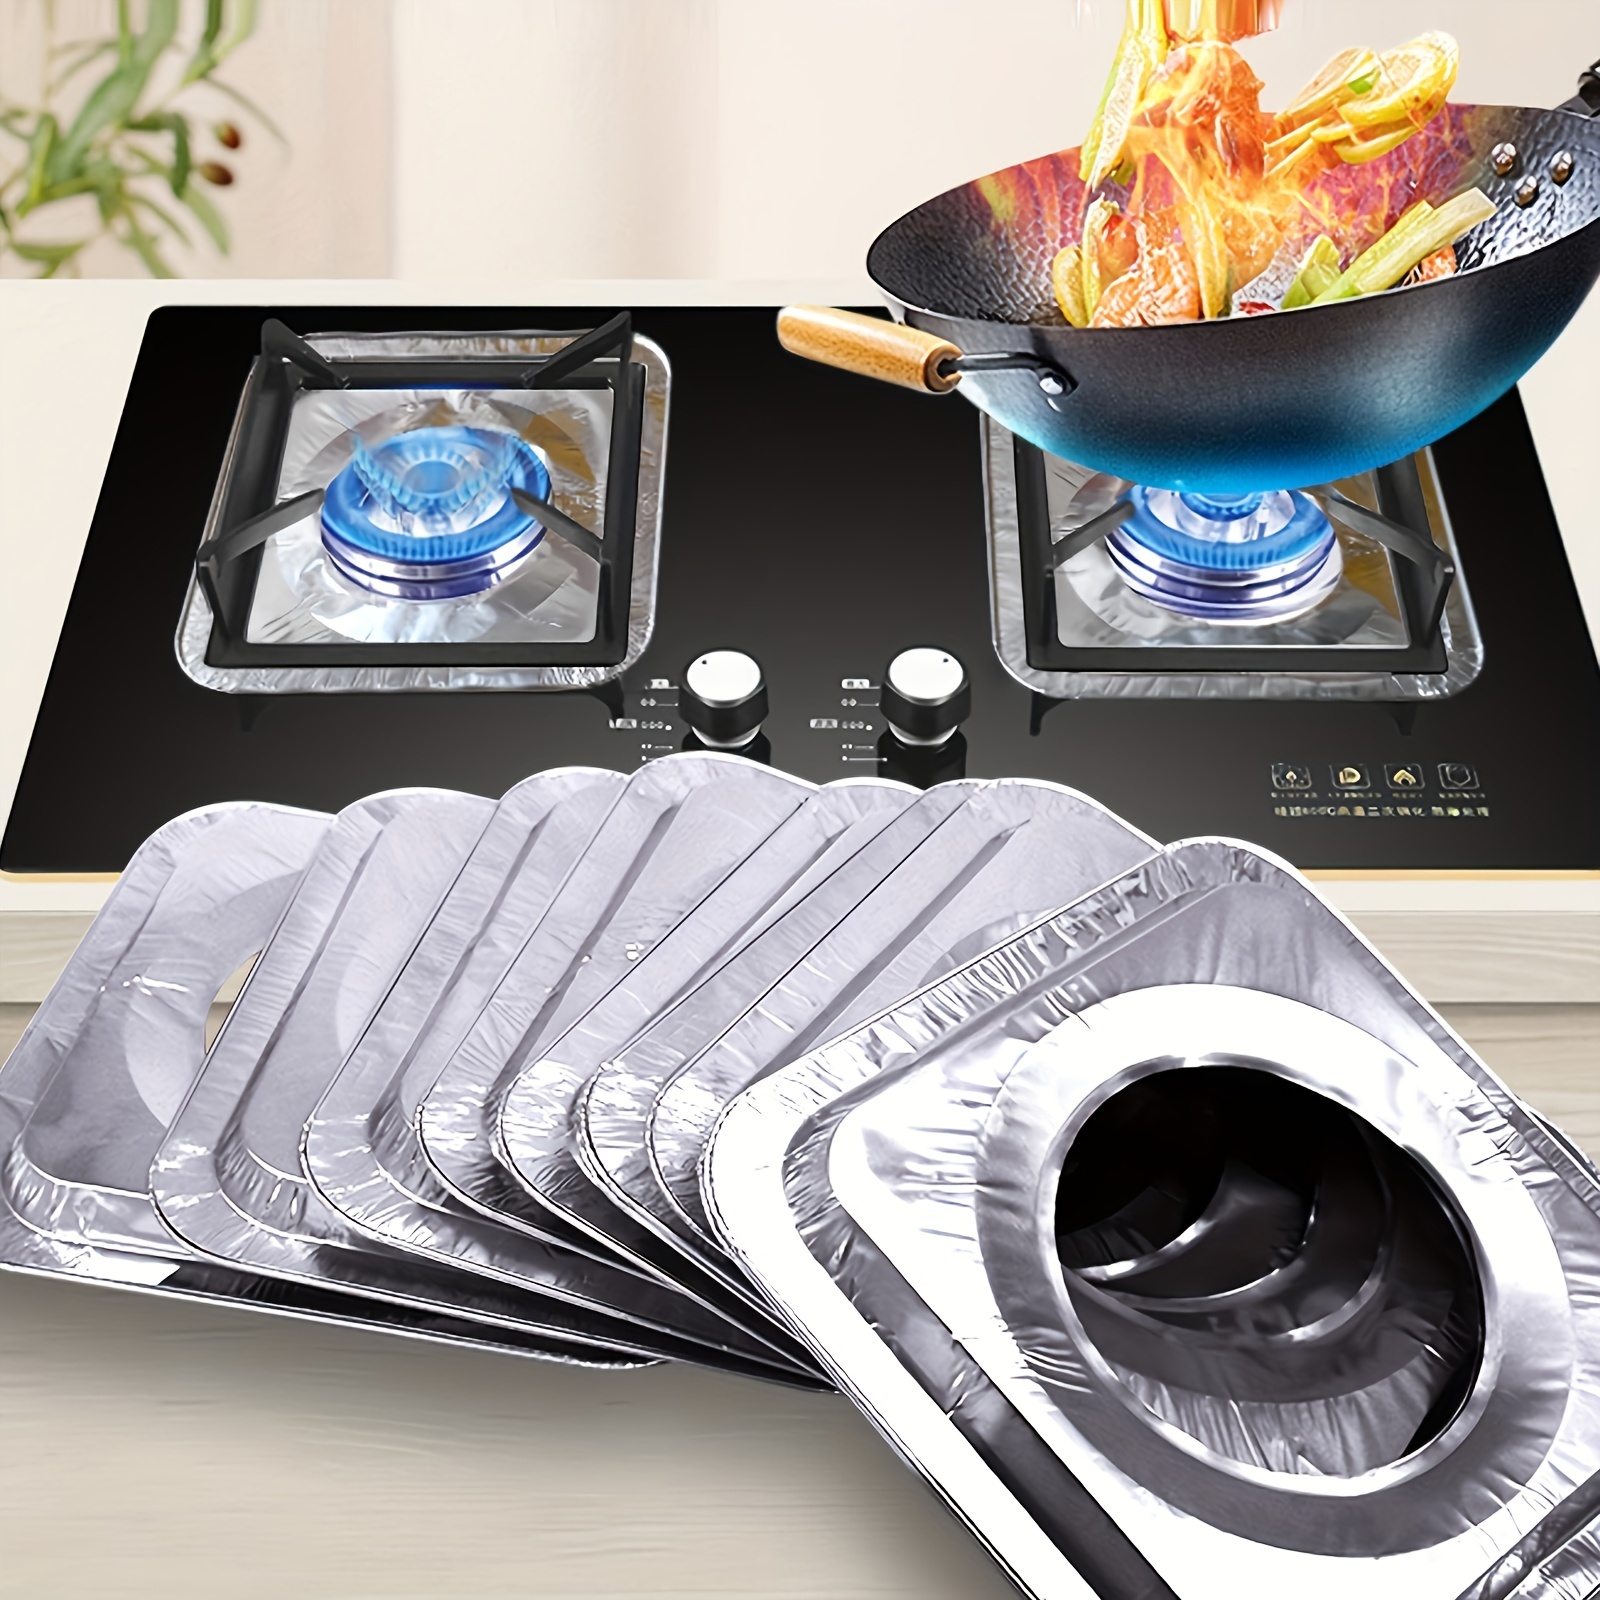 Stove Covers, Stove Protectors For Gas Range, Stove Burner Covers